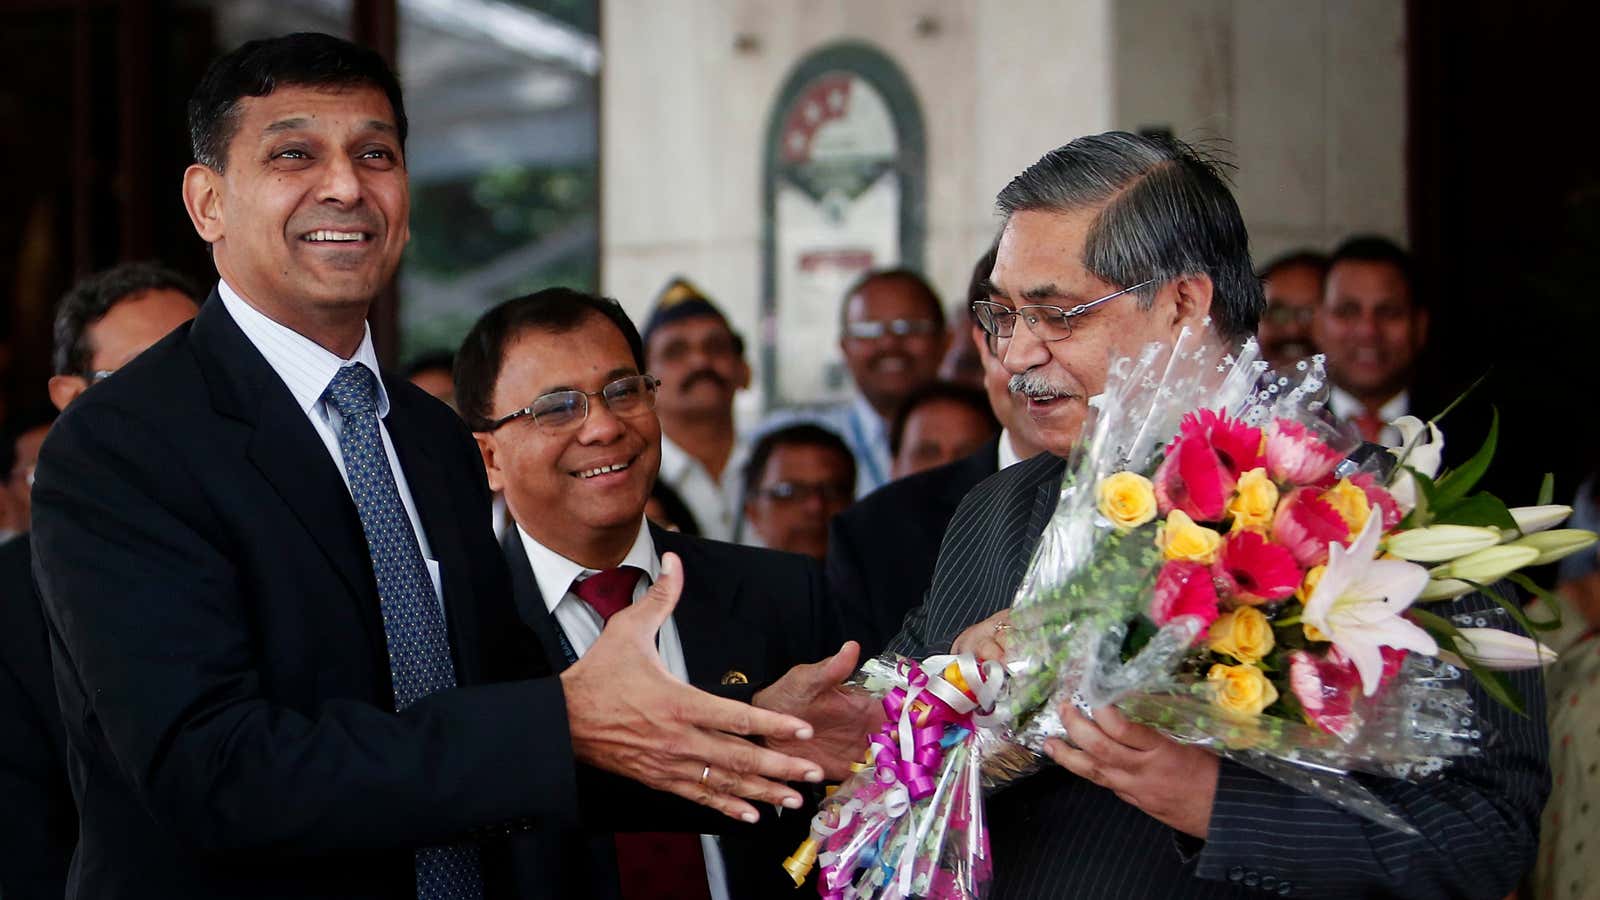 Raghuram Rajan, left, was not afraid to take on Alan Greenspan. And now, he’s sounding another clarion call as India’s new central banker.